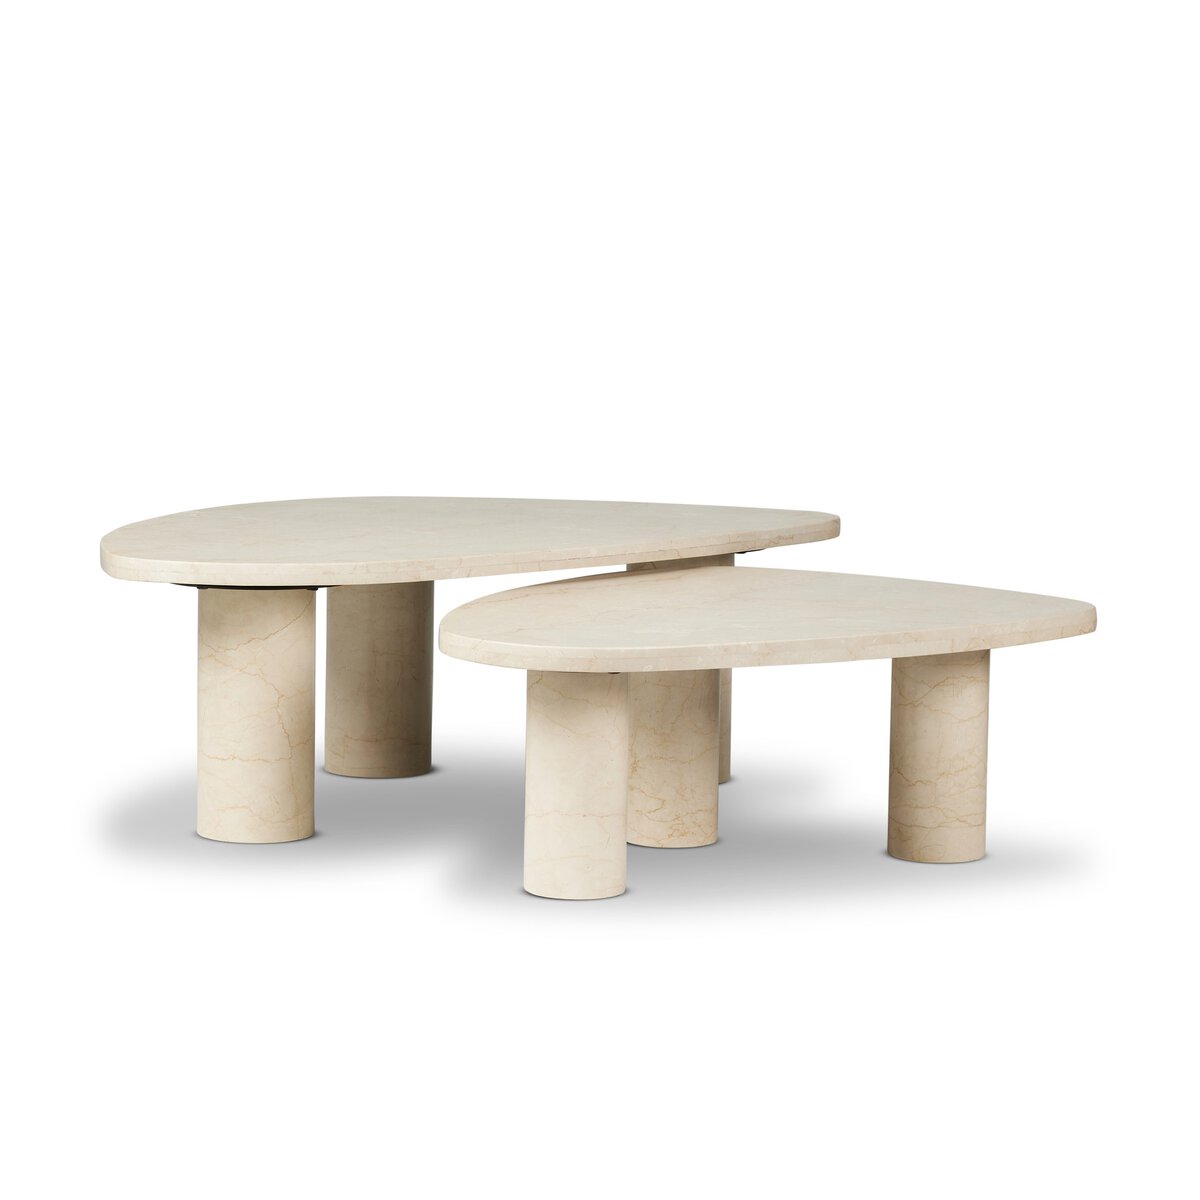 ZION COFFEE TABLE SET